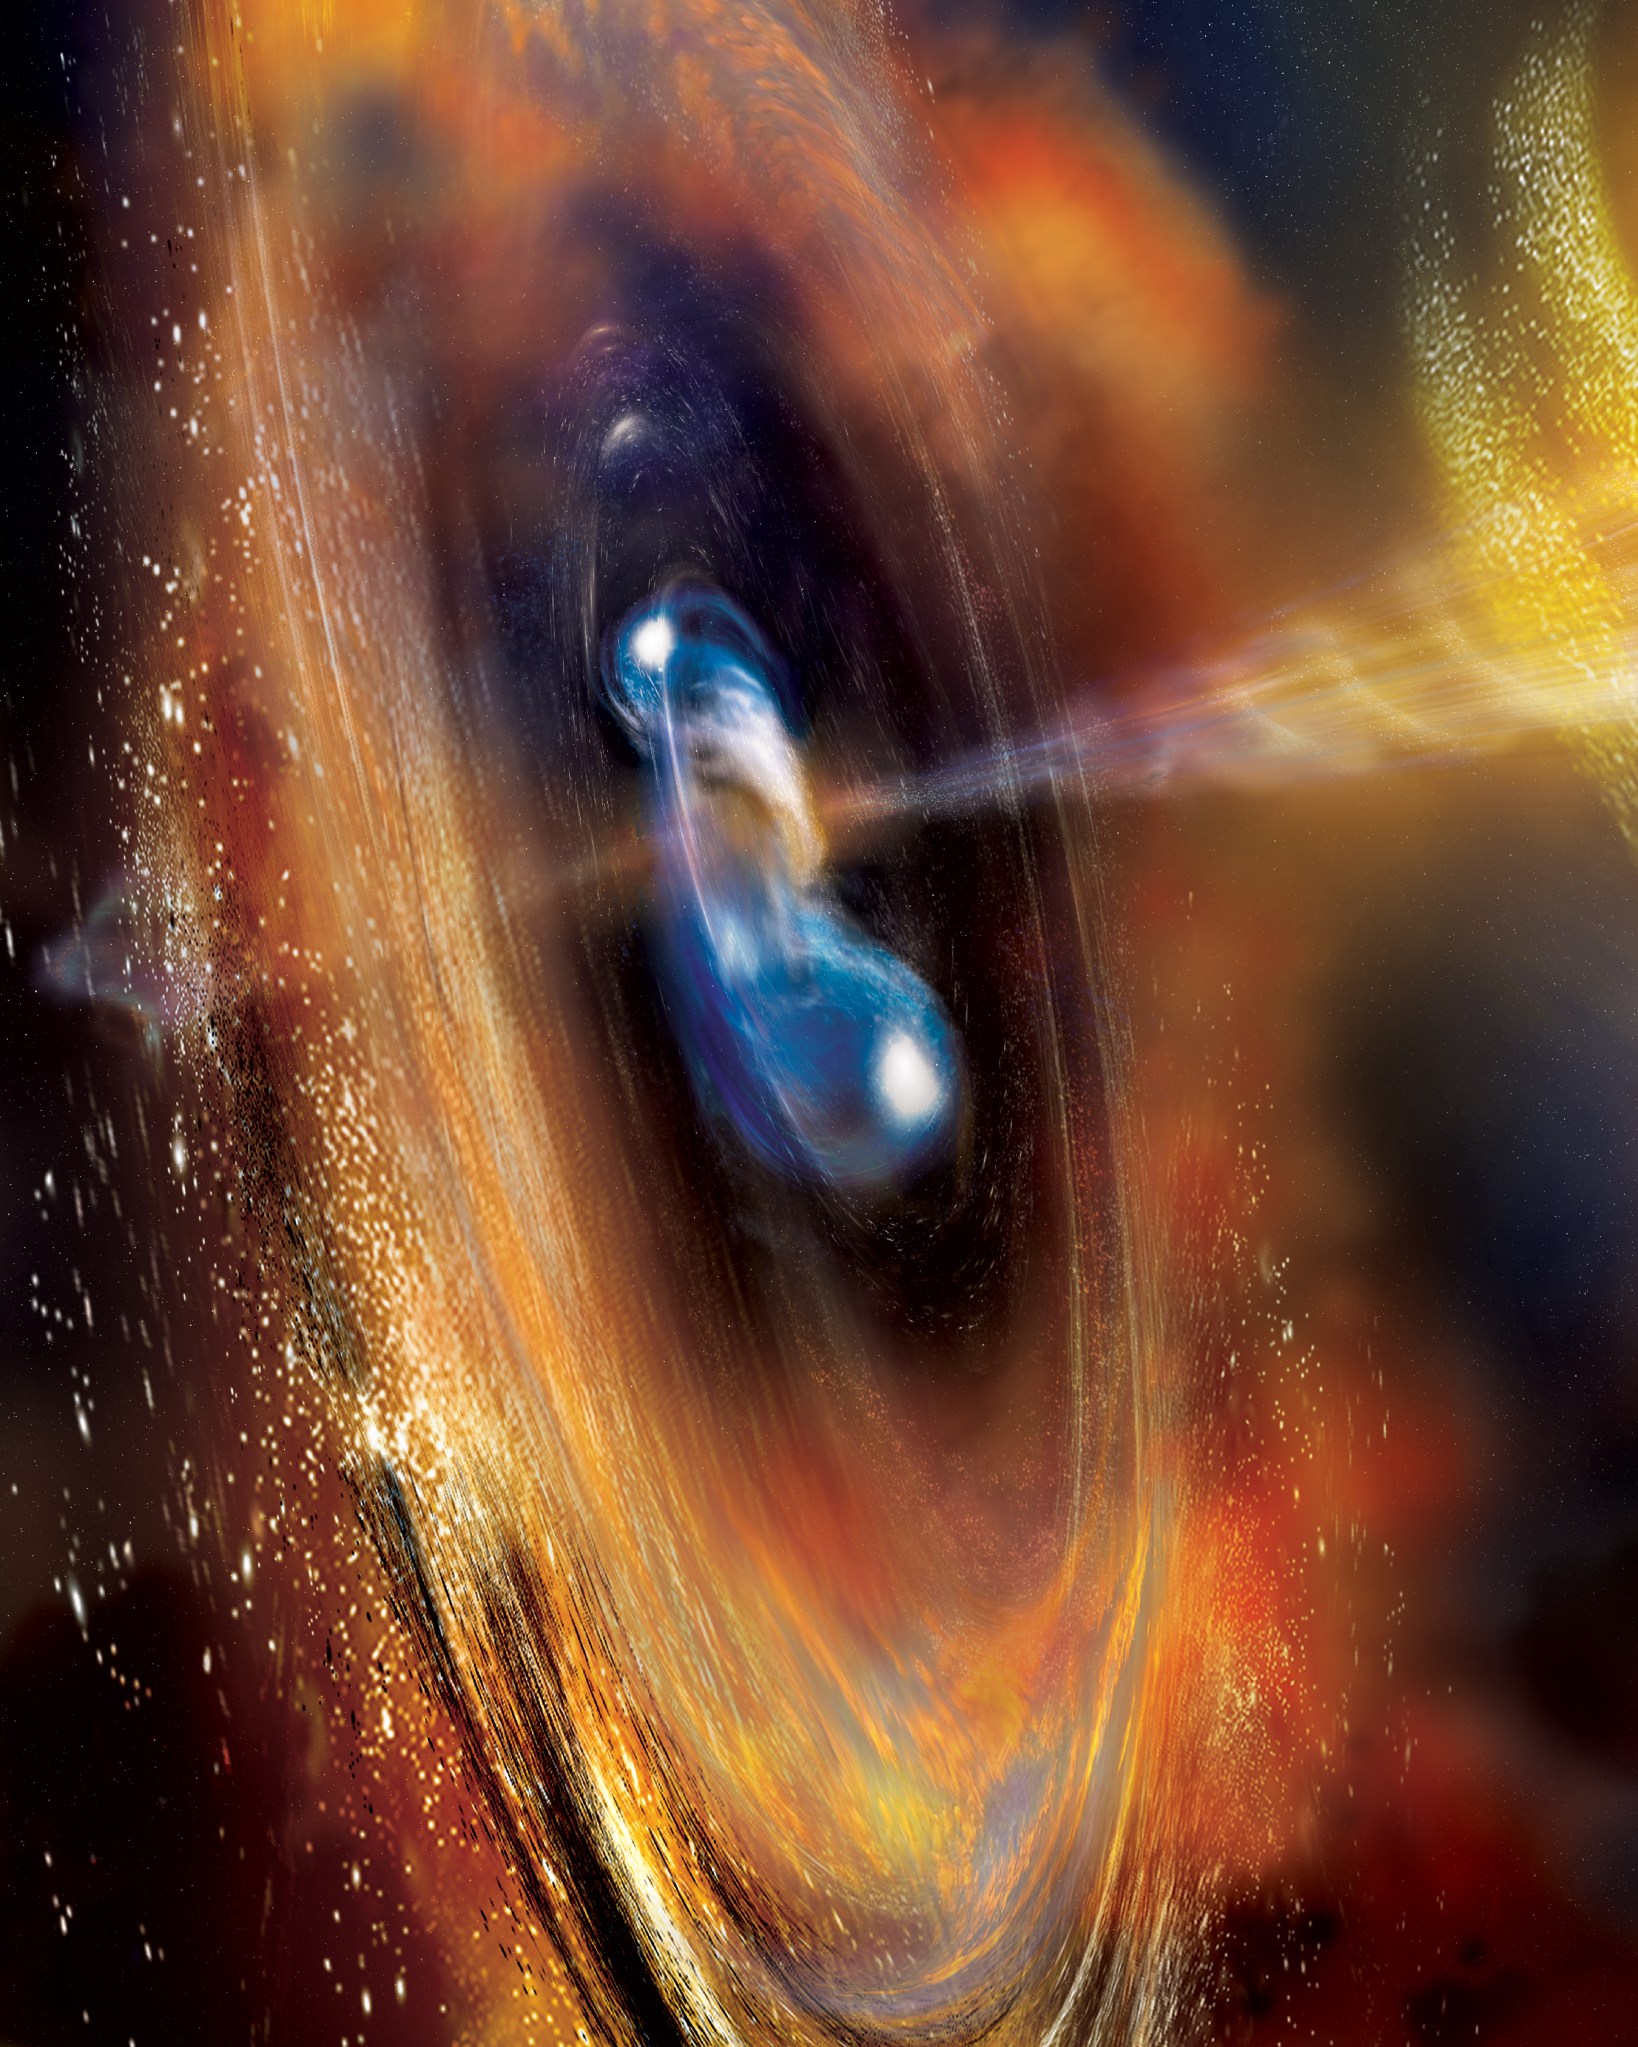 Two neutron stars begin to merge in this artist’s concept, blasting jets of high-speed particles. Collision events like this one create short gamma-ray bursts. Credit: NASA’s Goddard Space Flight Center/ A. Simonnet, Sonoma State University